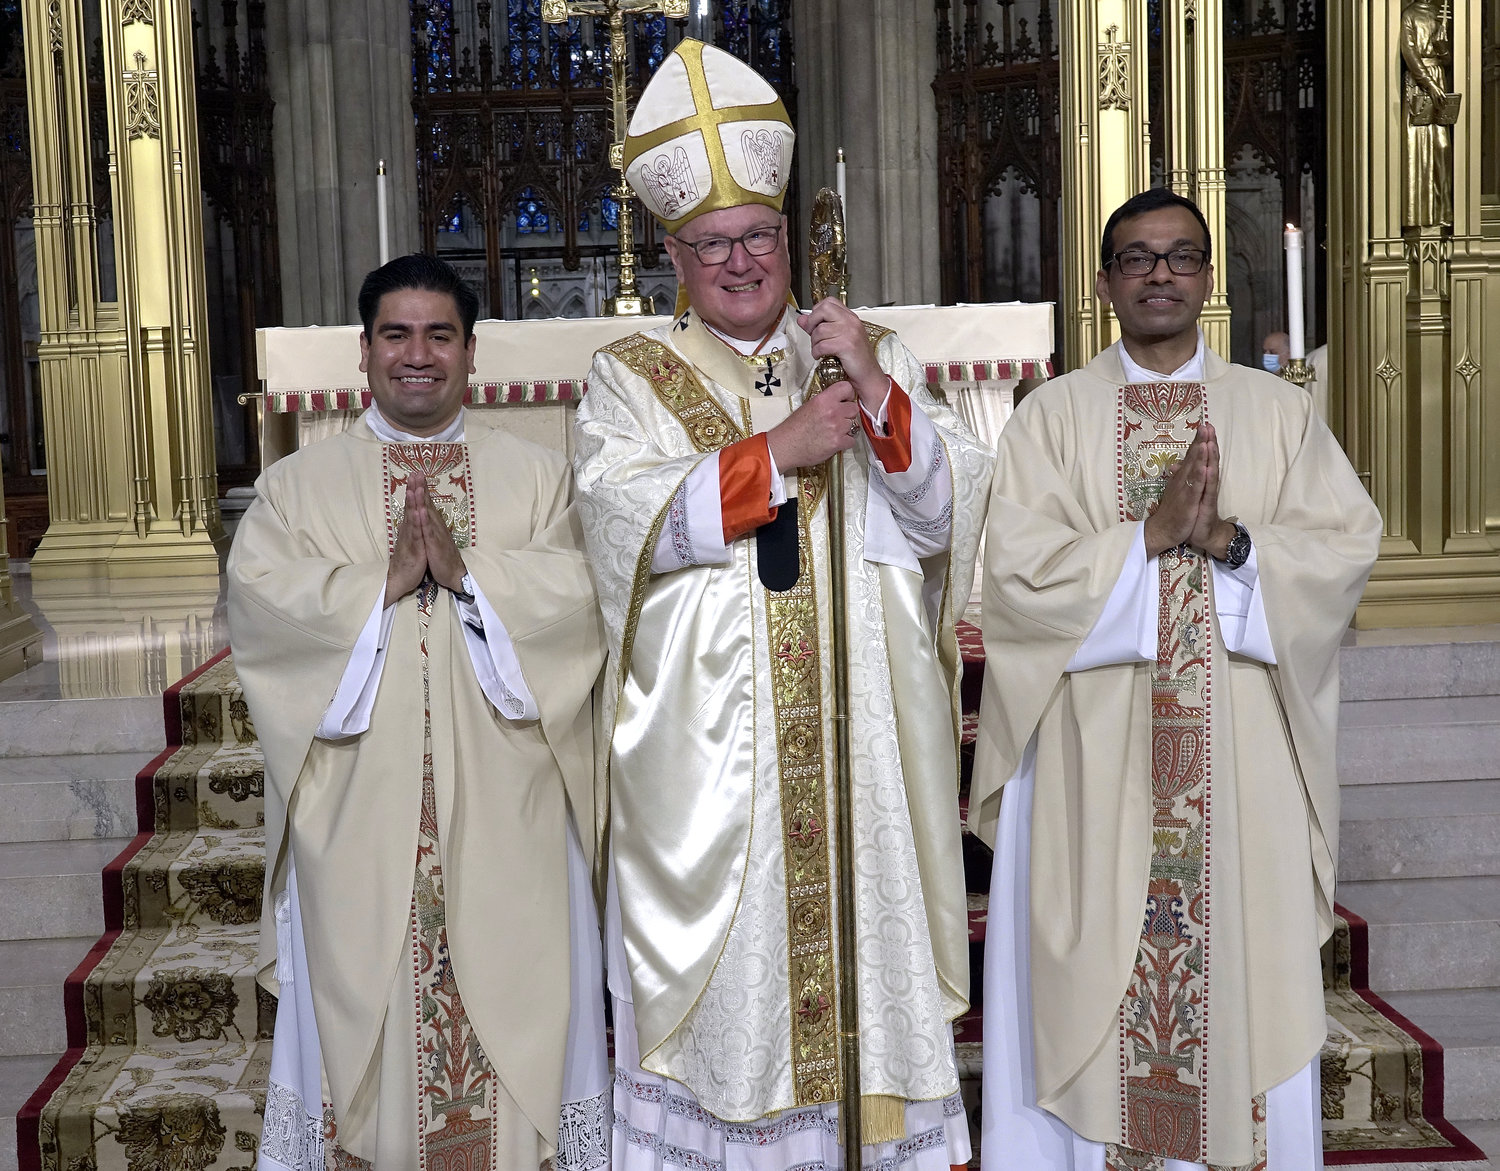 Cardinal Dolan joins Father Luis Silva and Father Roland Pereira, M.Id., after the Mass of Ordination